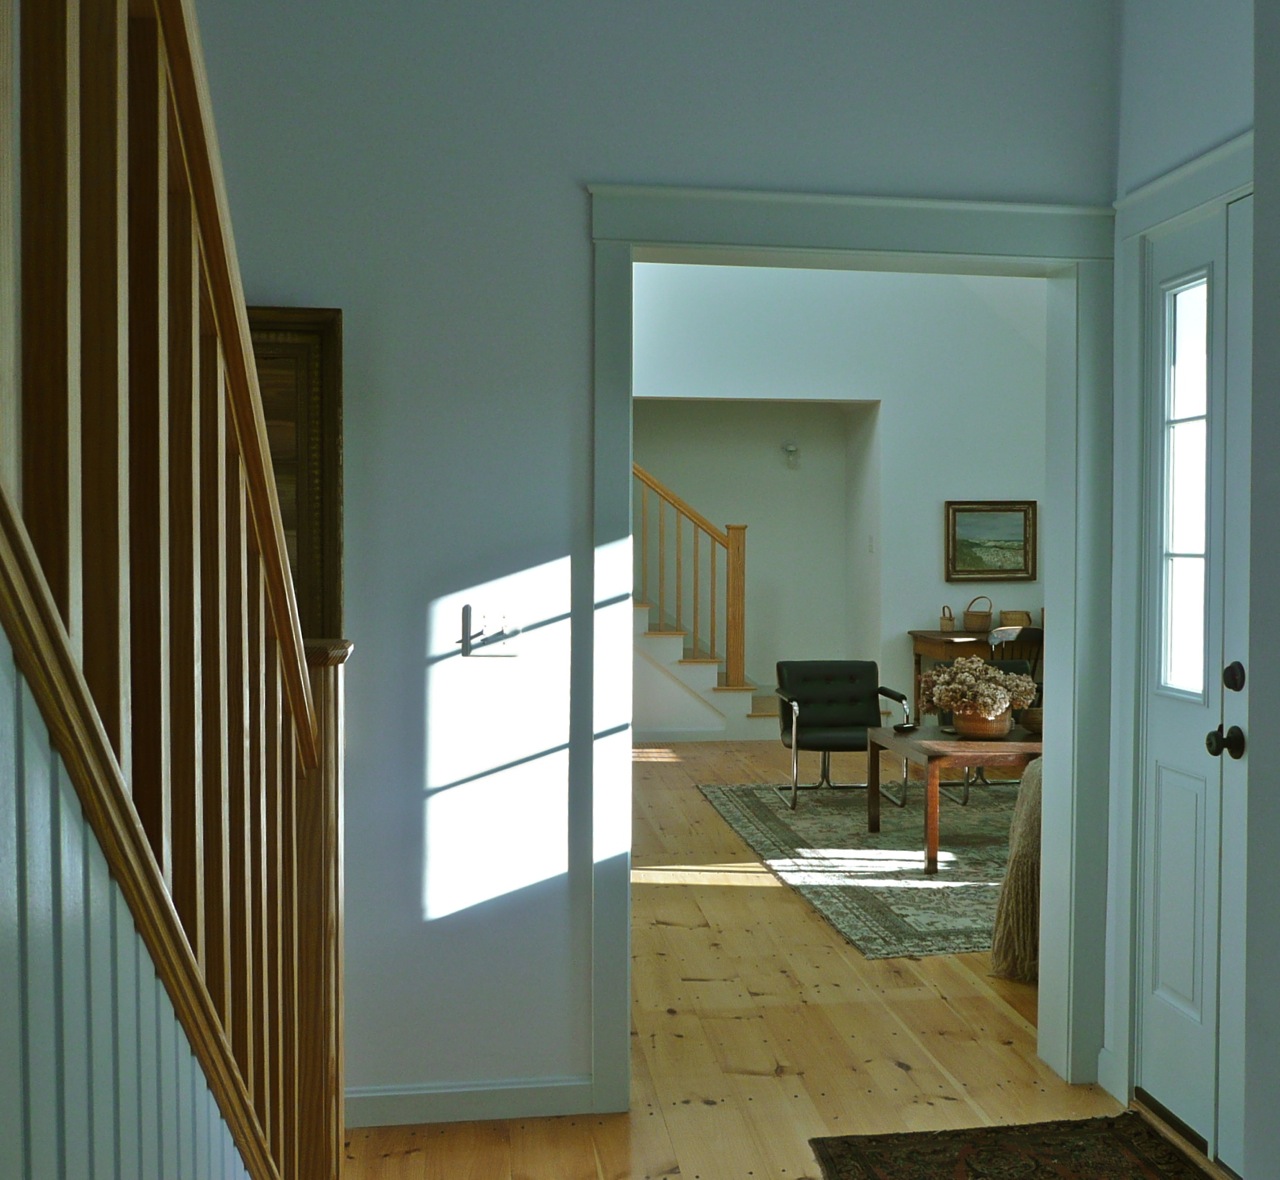 Entry hall, Cape cod house, Chatham MA